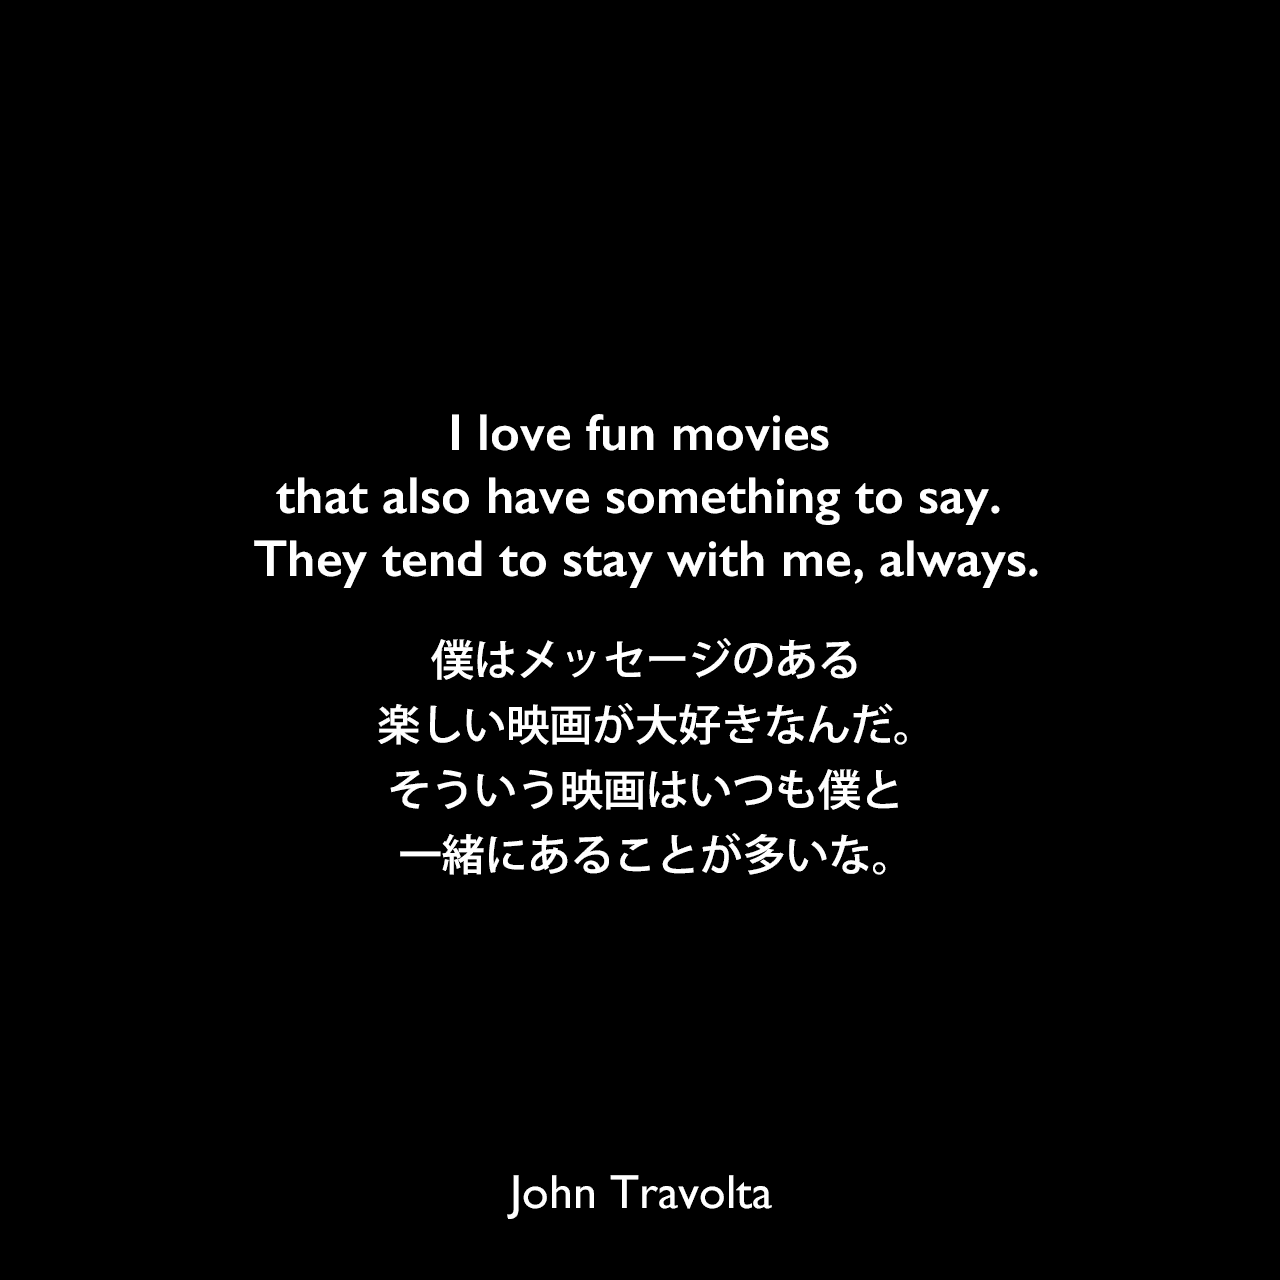 I love fun movies that also have something to say. They tend to stay with me, always.僕はメッセージのある楽しい映画が大好きなんだ。そういう映画はいつも僕と一緒にあることが多いな。John Travolta